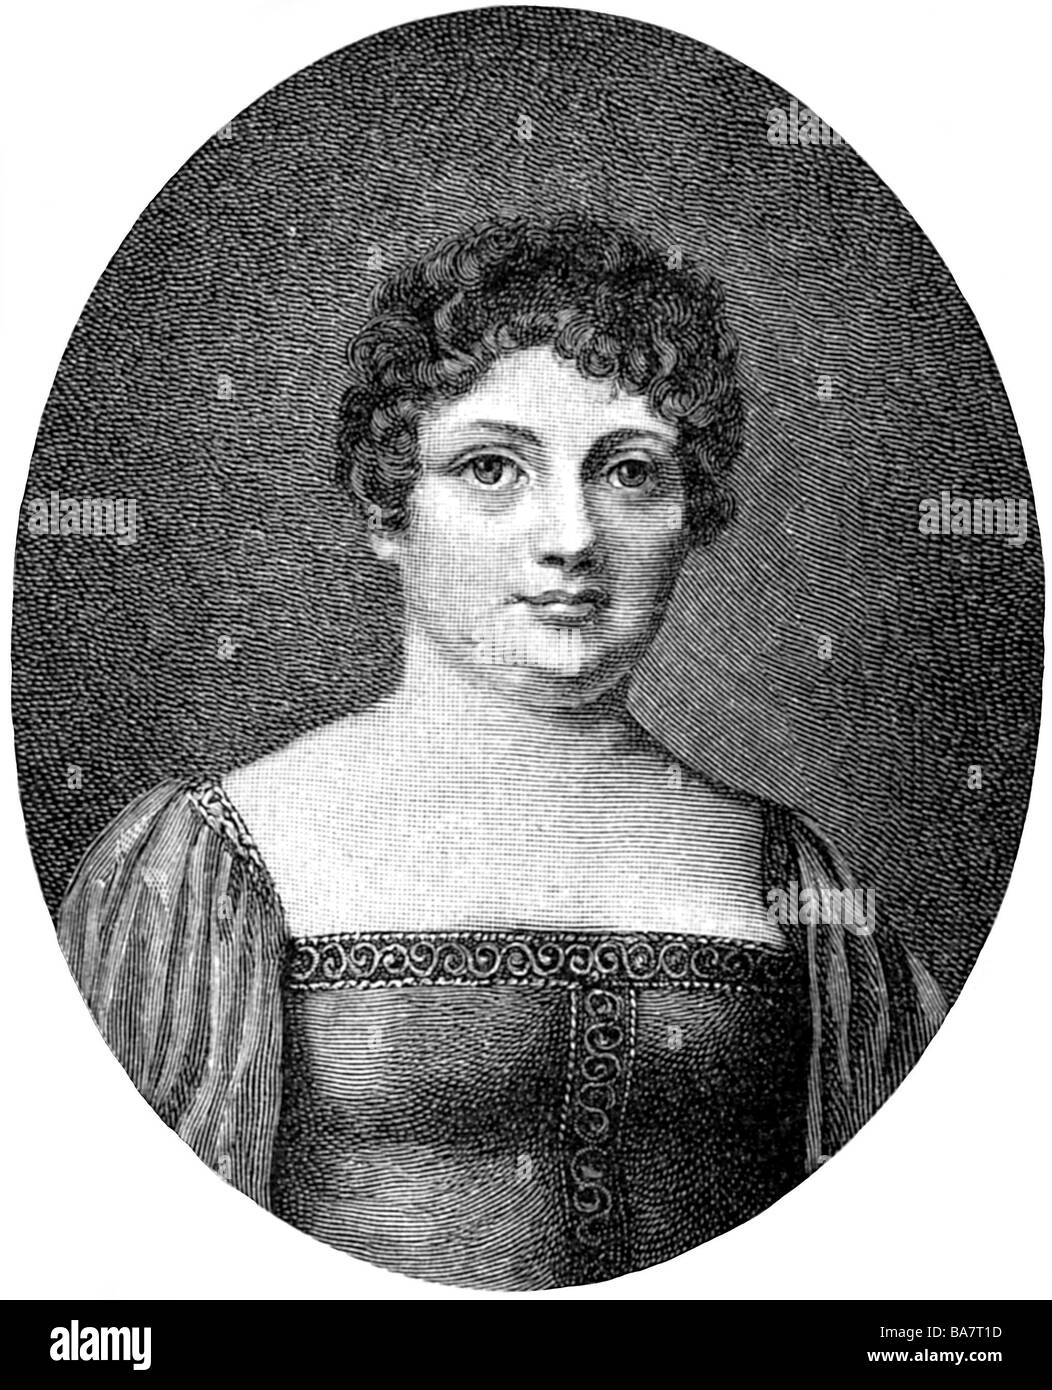 Vulpius, Christiane, 1.6.1765 - 6.6.1816, wife of Johann Wolfgang von Goethe, portrait, wood engraving after painting by Raabe from 1810, Artist's Copyright has not to be cleared Stock Photo